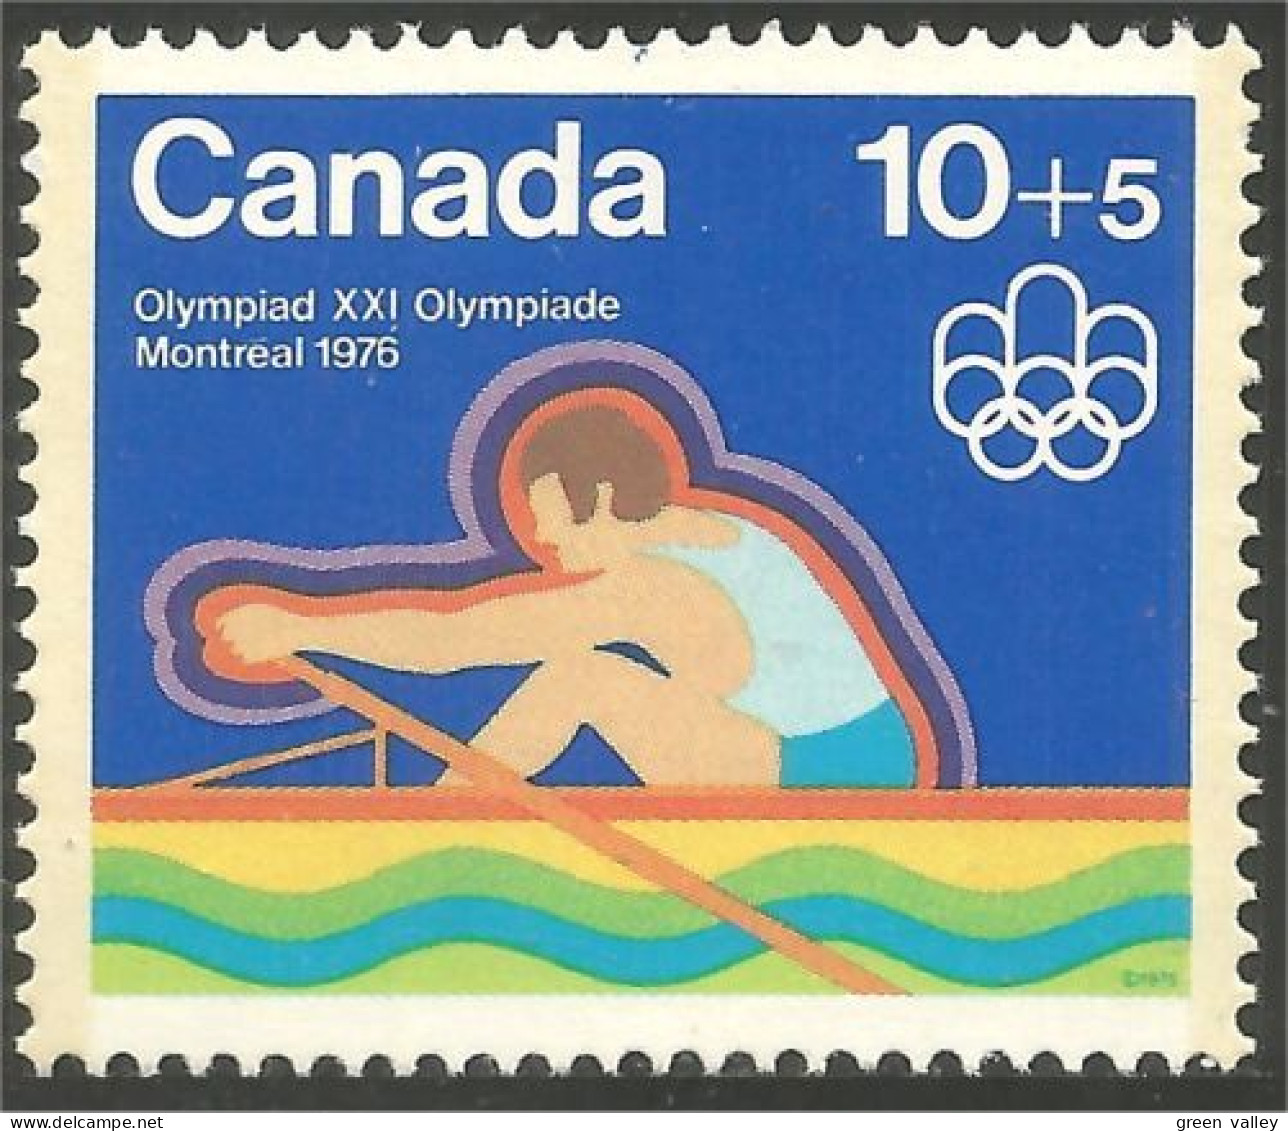 Canada 10c+5c Aviron Rowing Jeux Olympiques Montreal 1976 Olympic Games MNH ** Neuf SC (CB-05c) - Estate 1976: Montreal